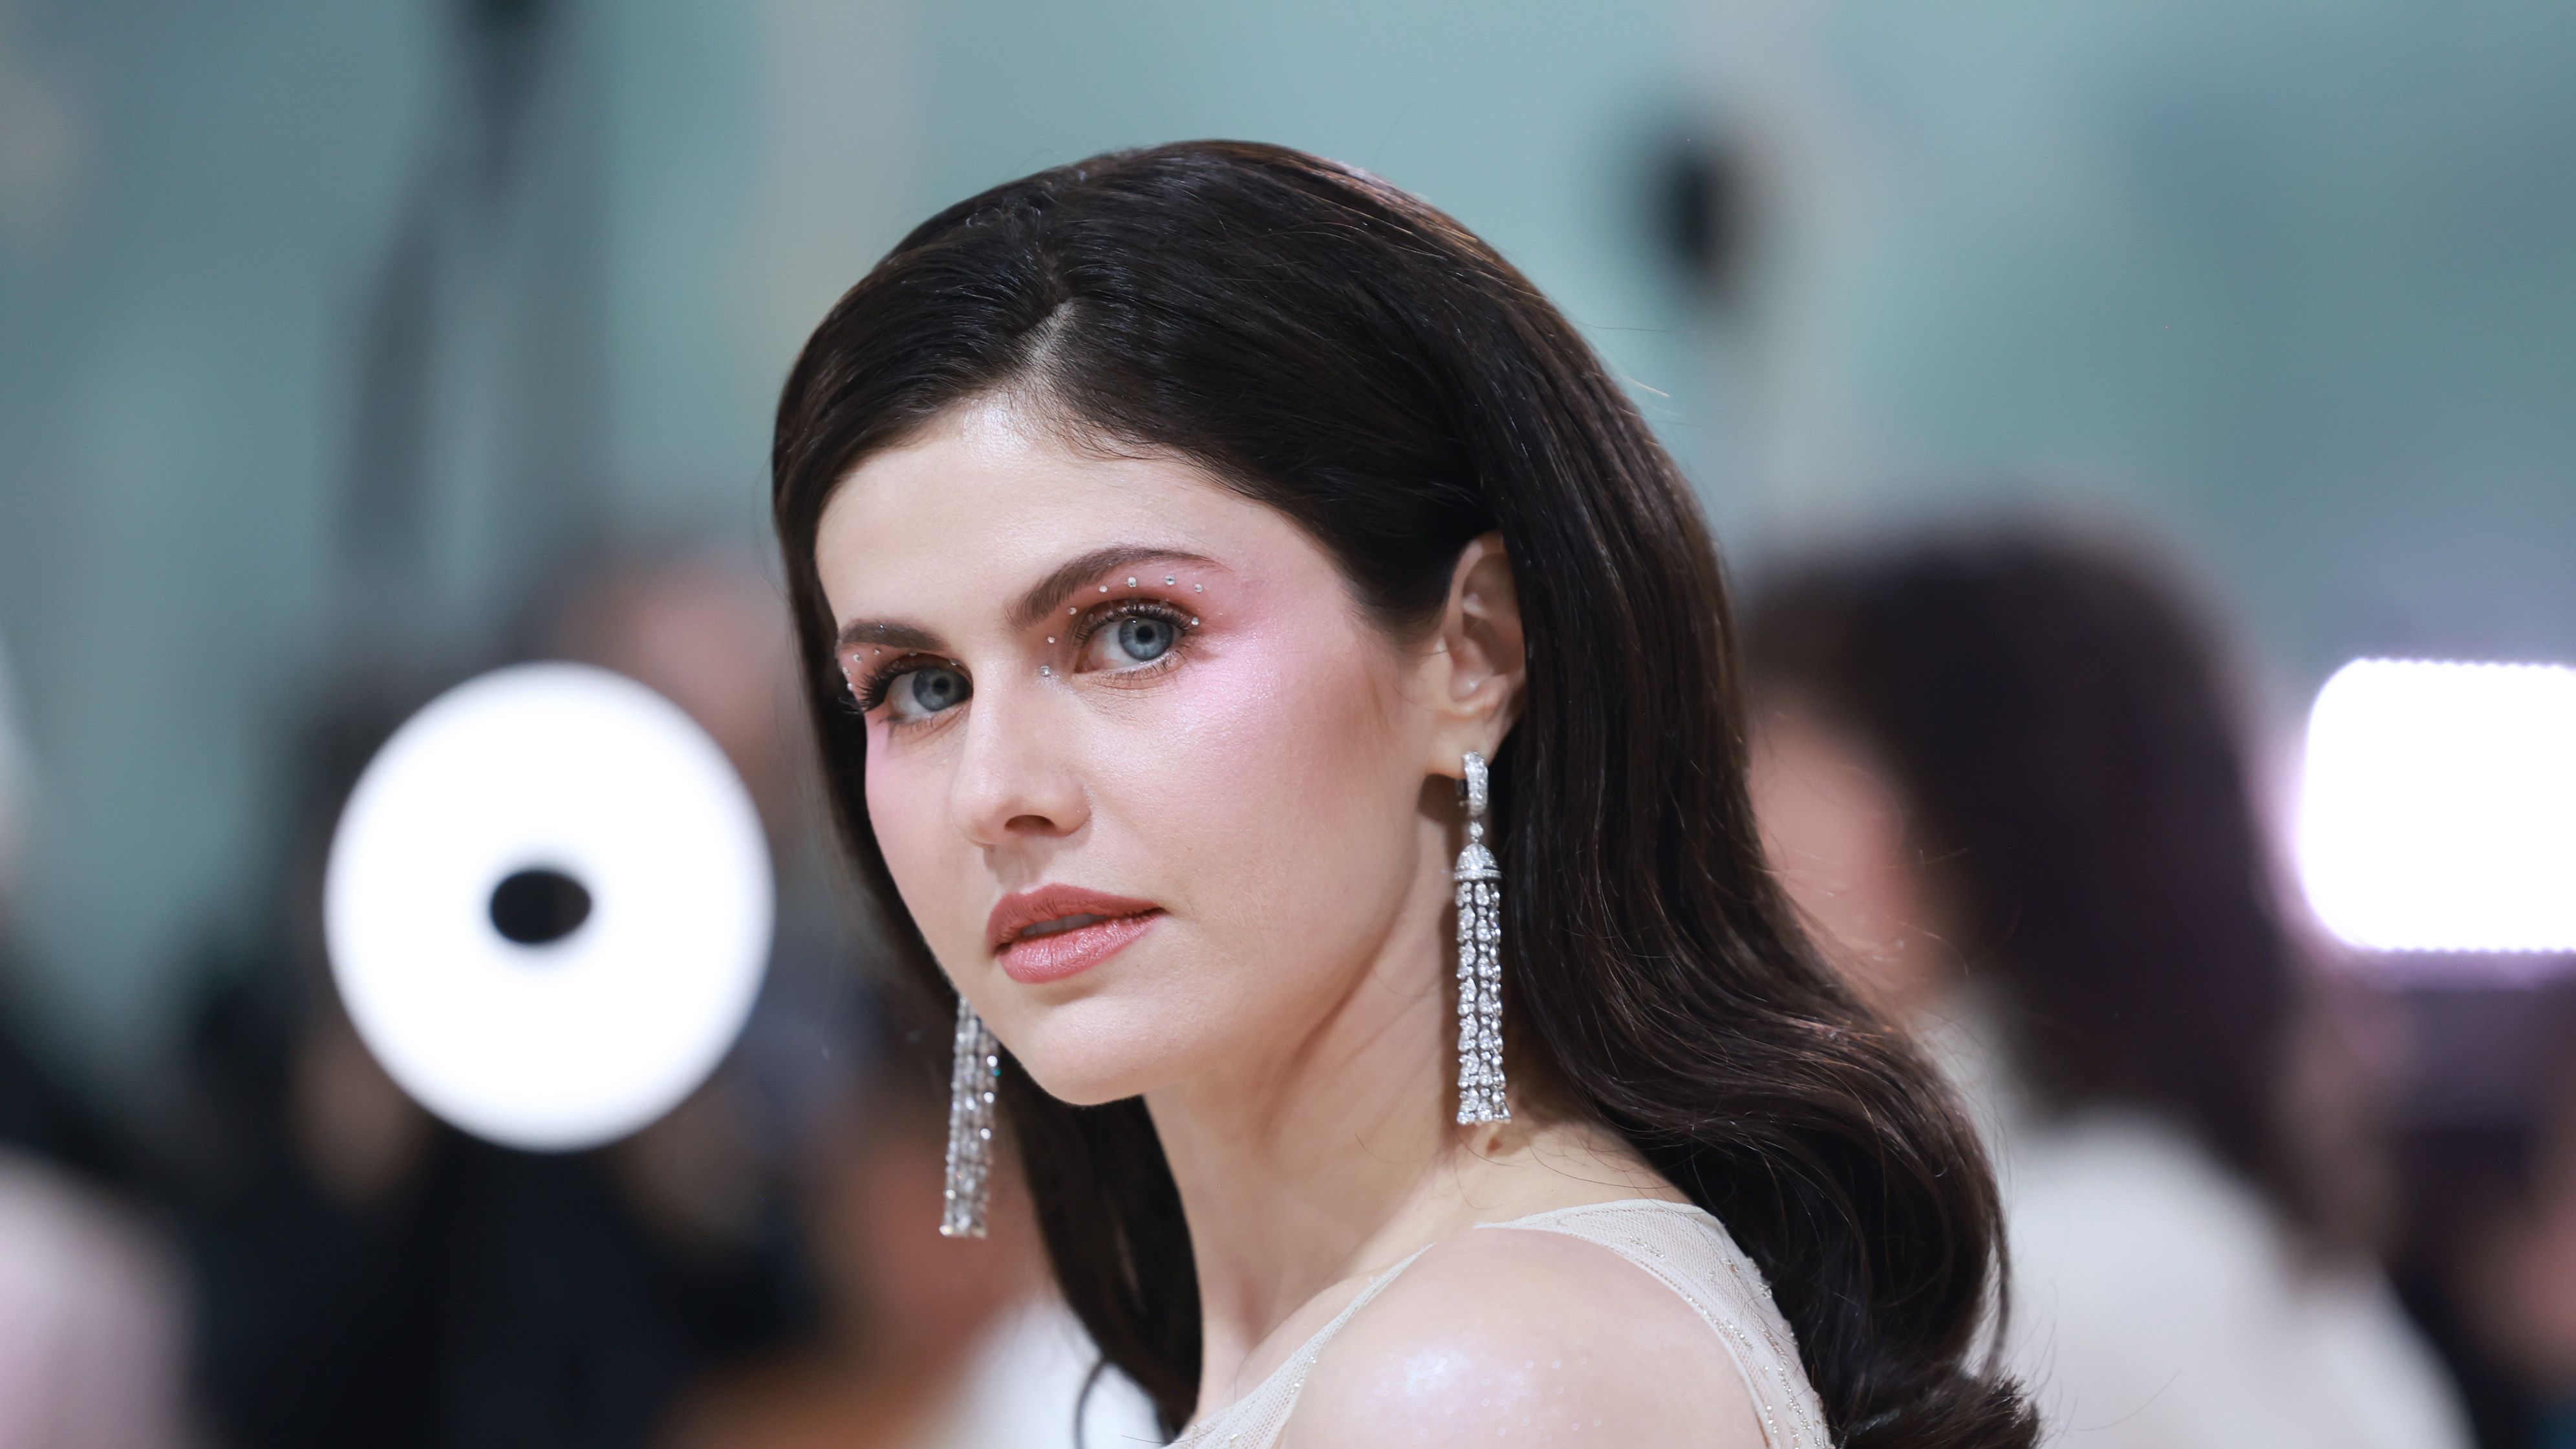 Why does everyone think Alexandra Daddario is a good actress? - Quora